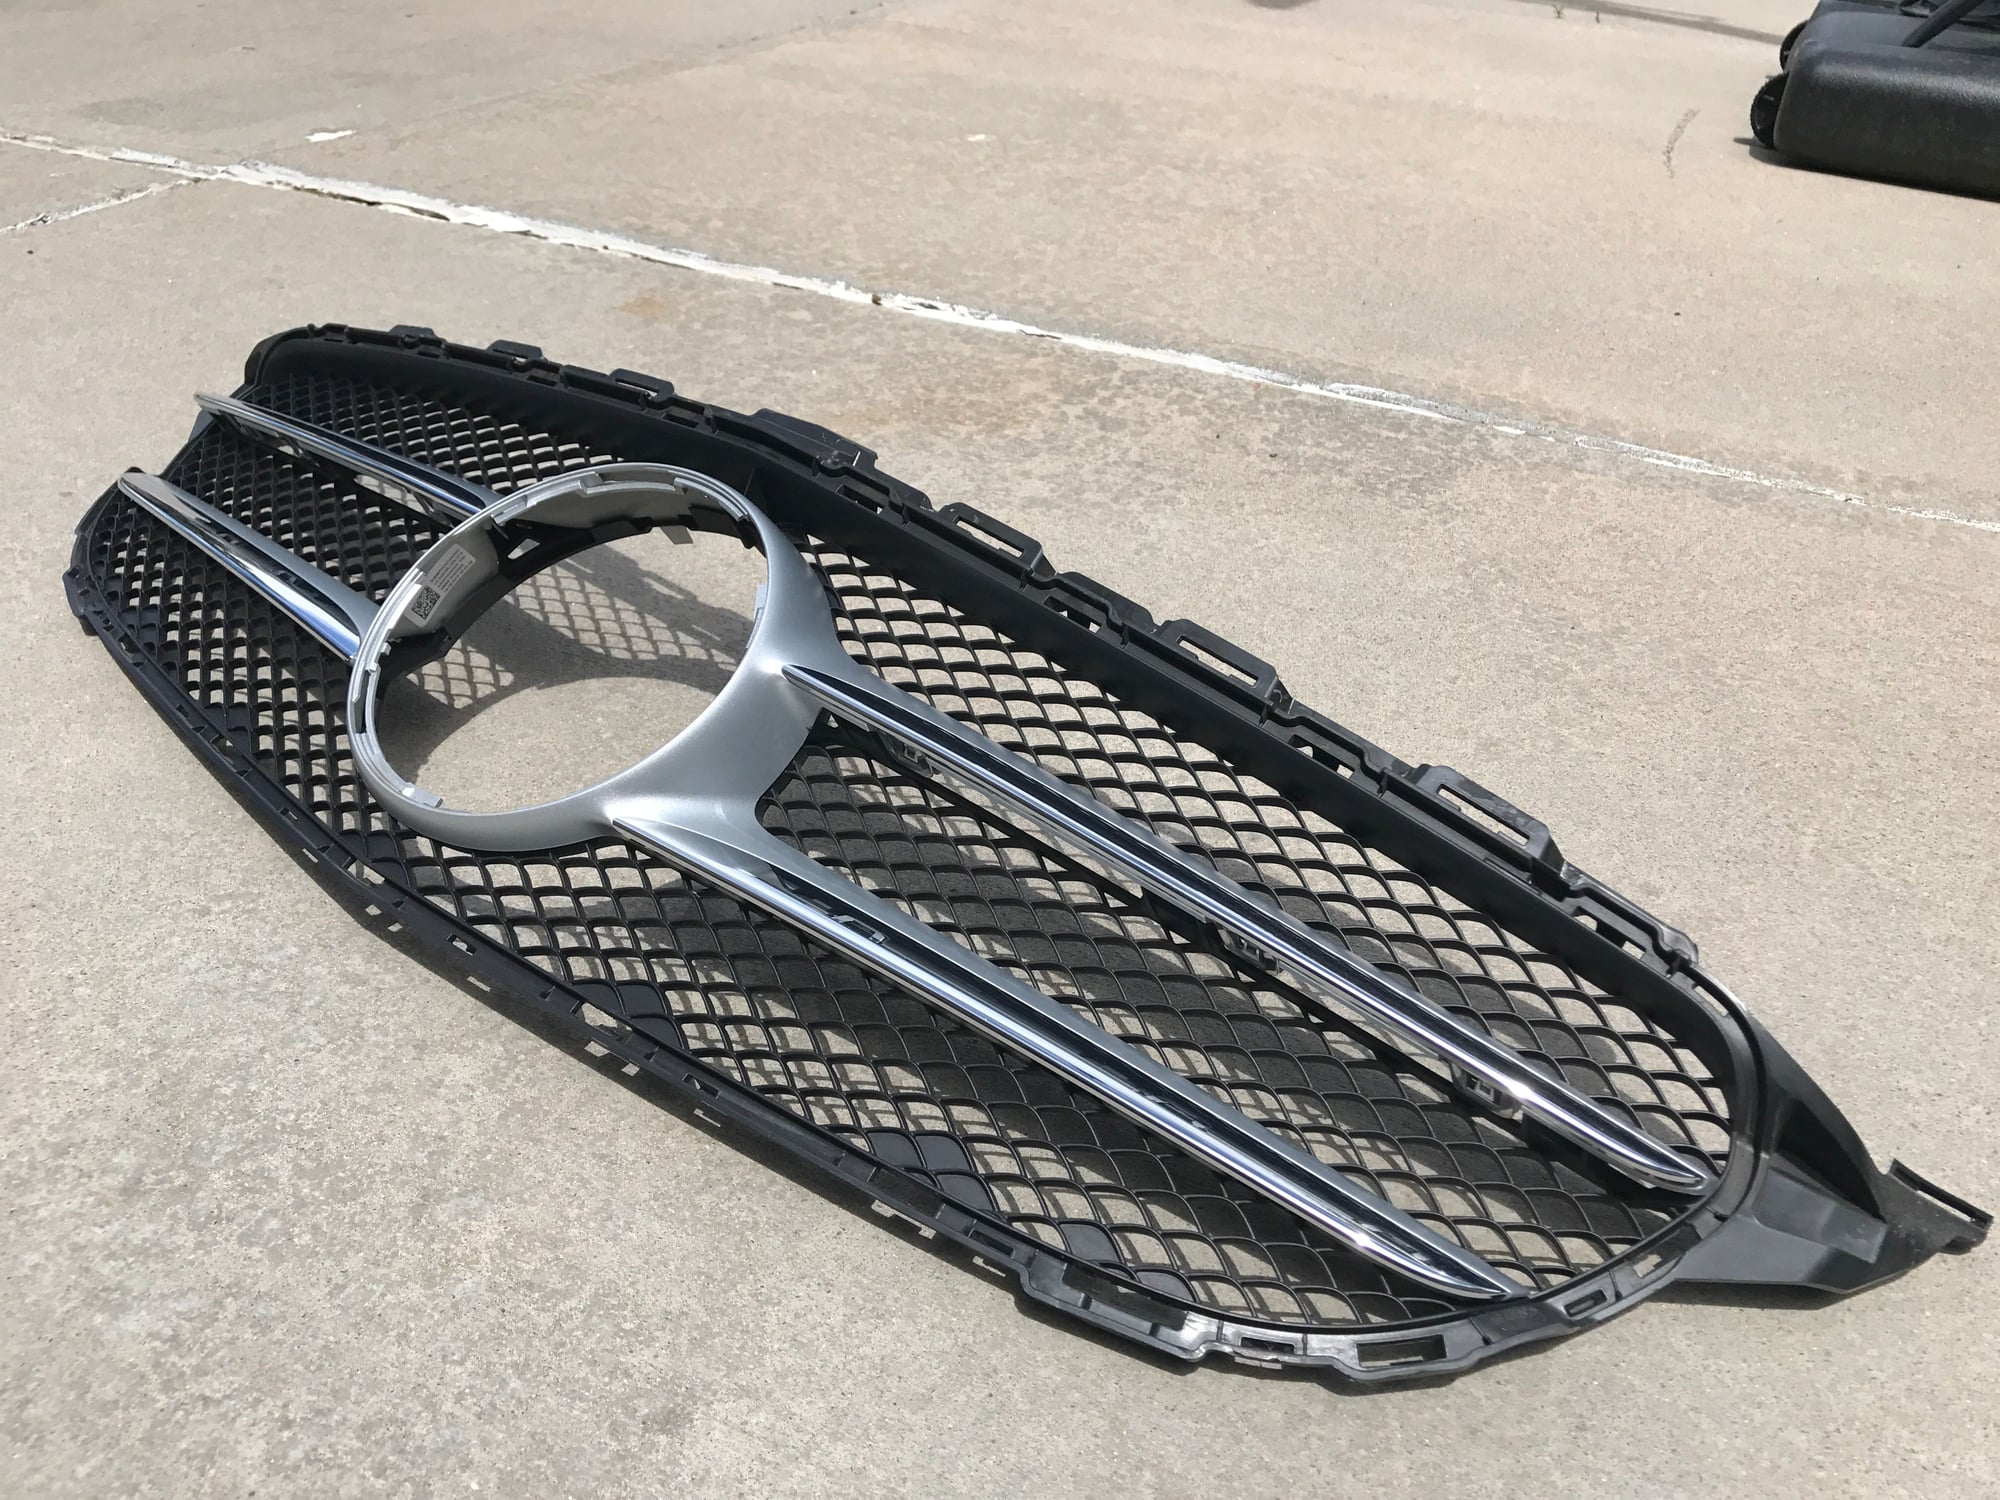 Exterior Body Parts - 2015 - 2017 Mercedes Benz C300 C400 Factory oem Grille W205 p/n A2058800183 - Used - 2015 Mercedes-Benz C400 - 2015 to 2017 Mercedes-Benz C300 - Centennial, CO 80015, United States